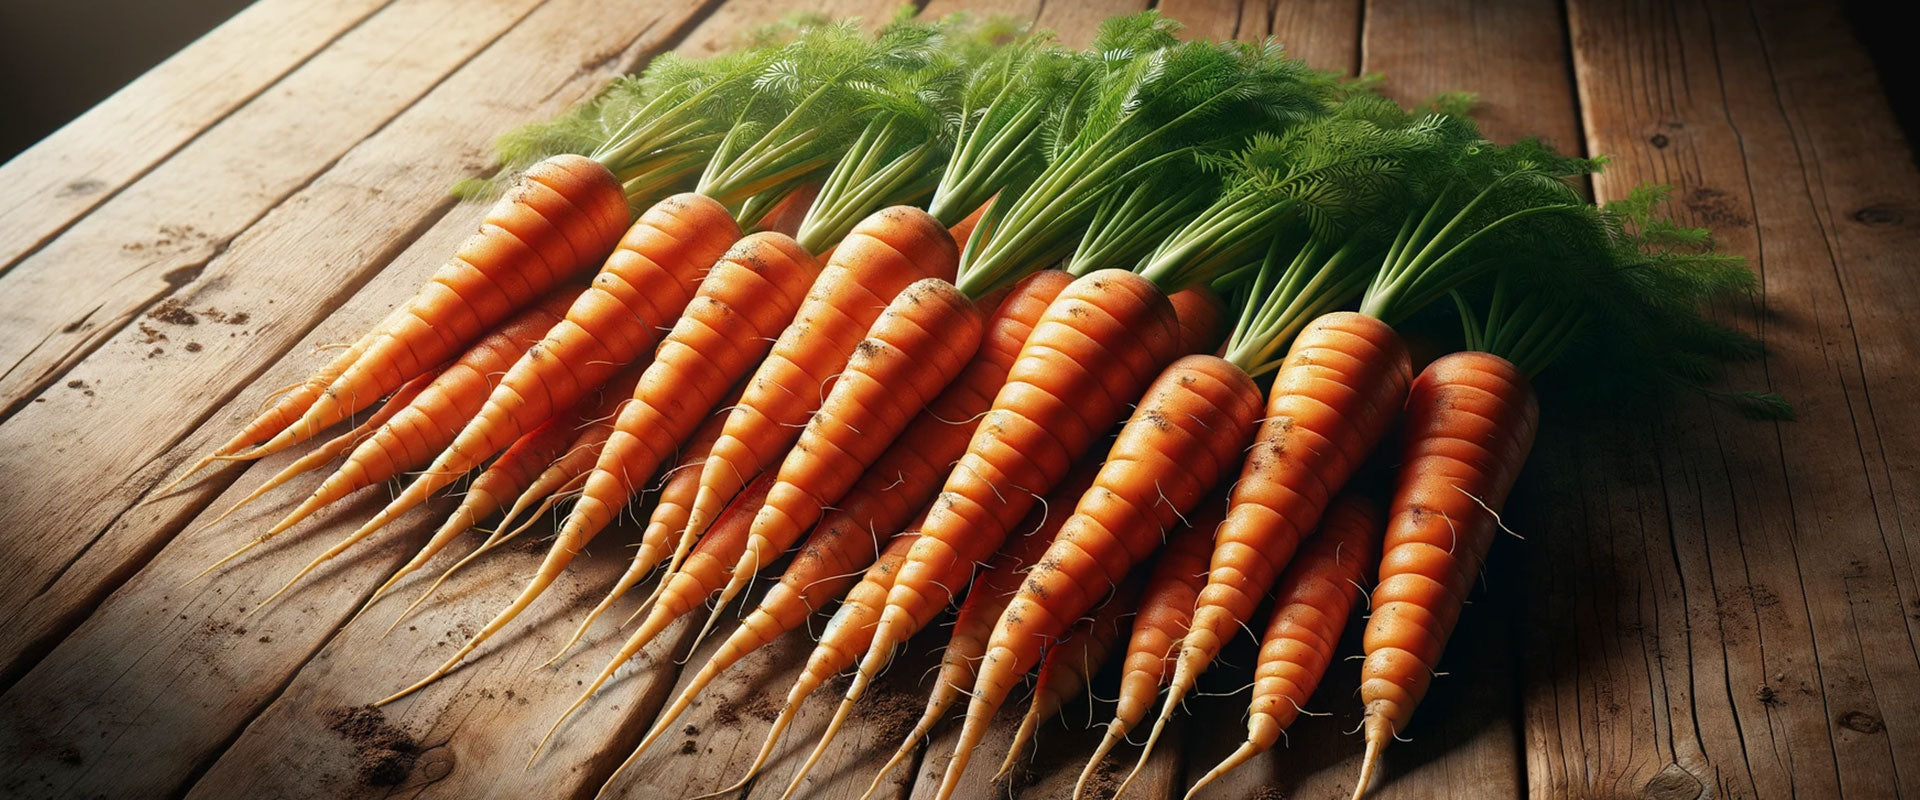 carrots for natural orange food color and dye